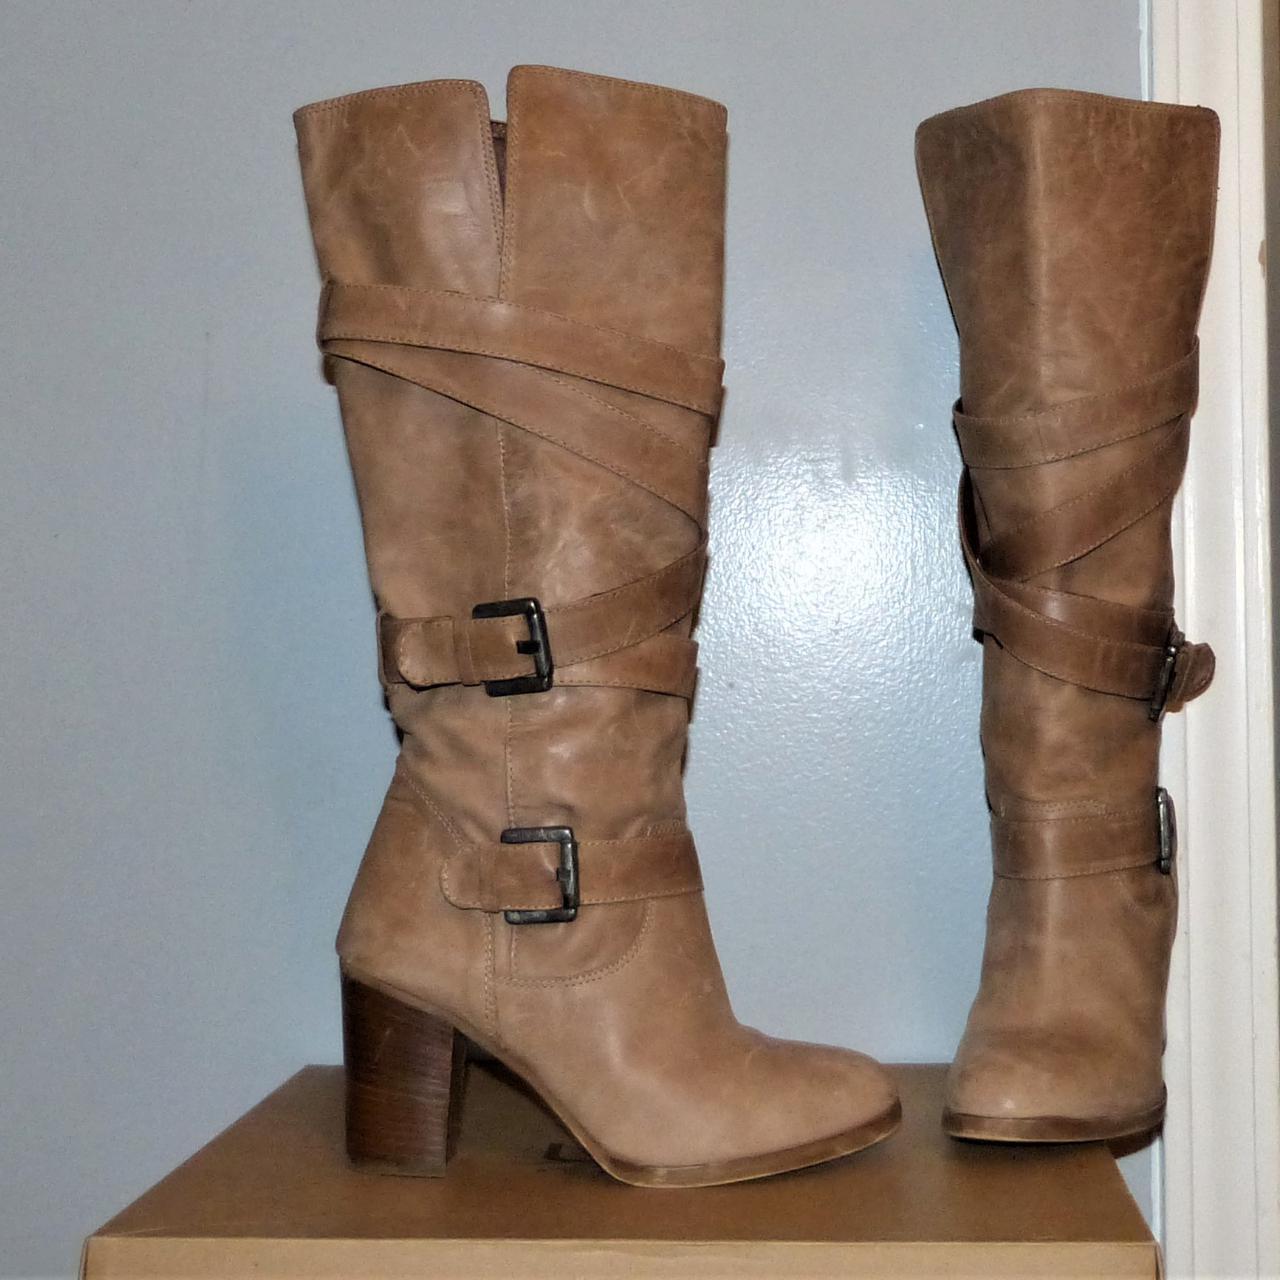 Women's Tan and Brown Boots